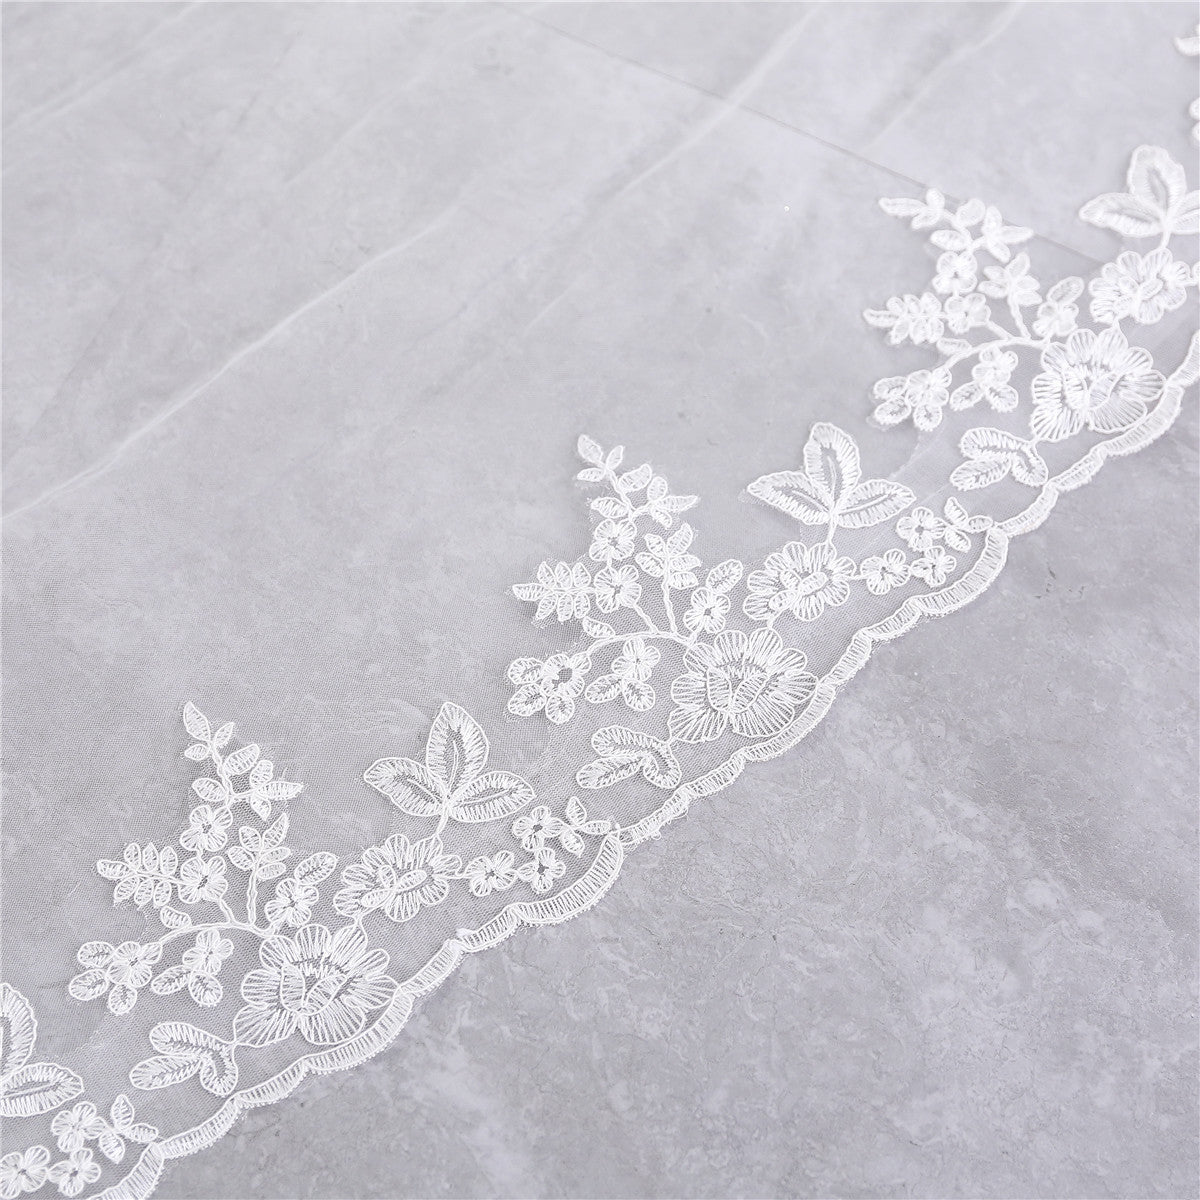 Wedding Veil One-Tier Tulle Lace Edge Cathedral Veils Appliques TS91021